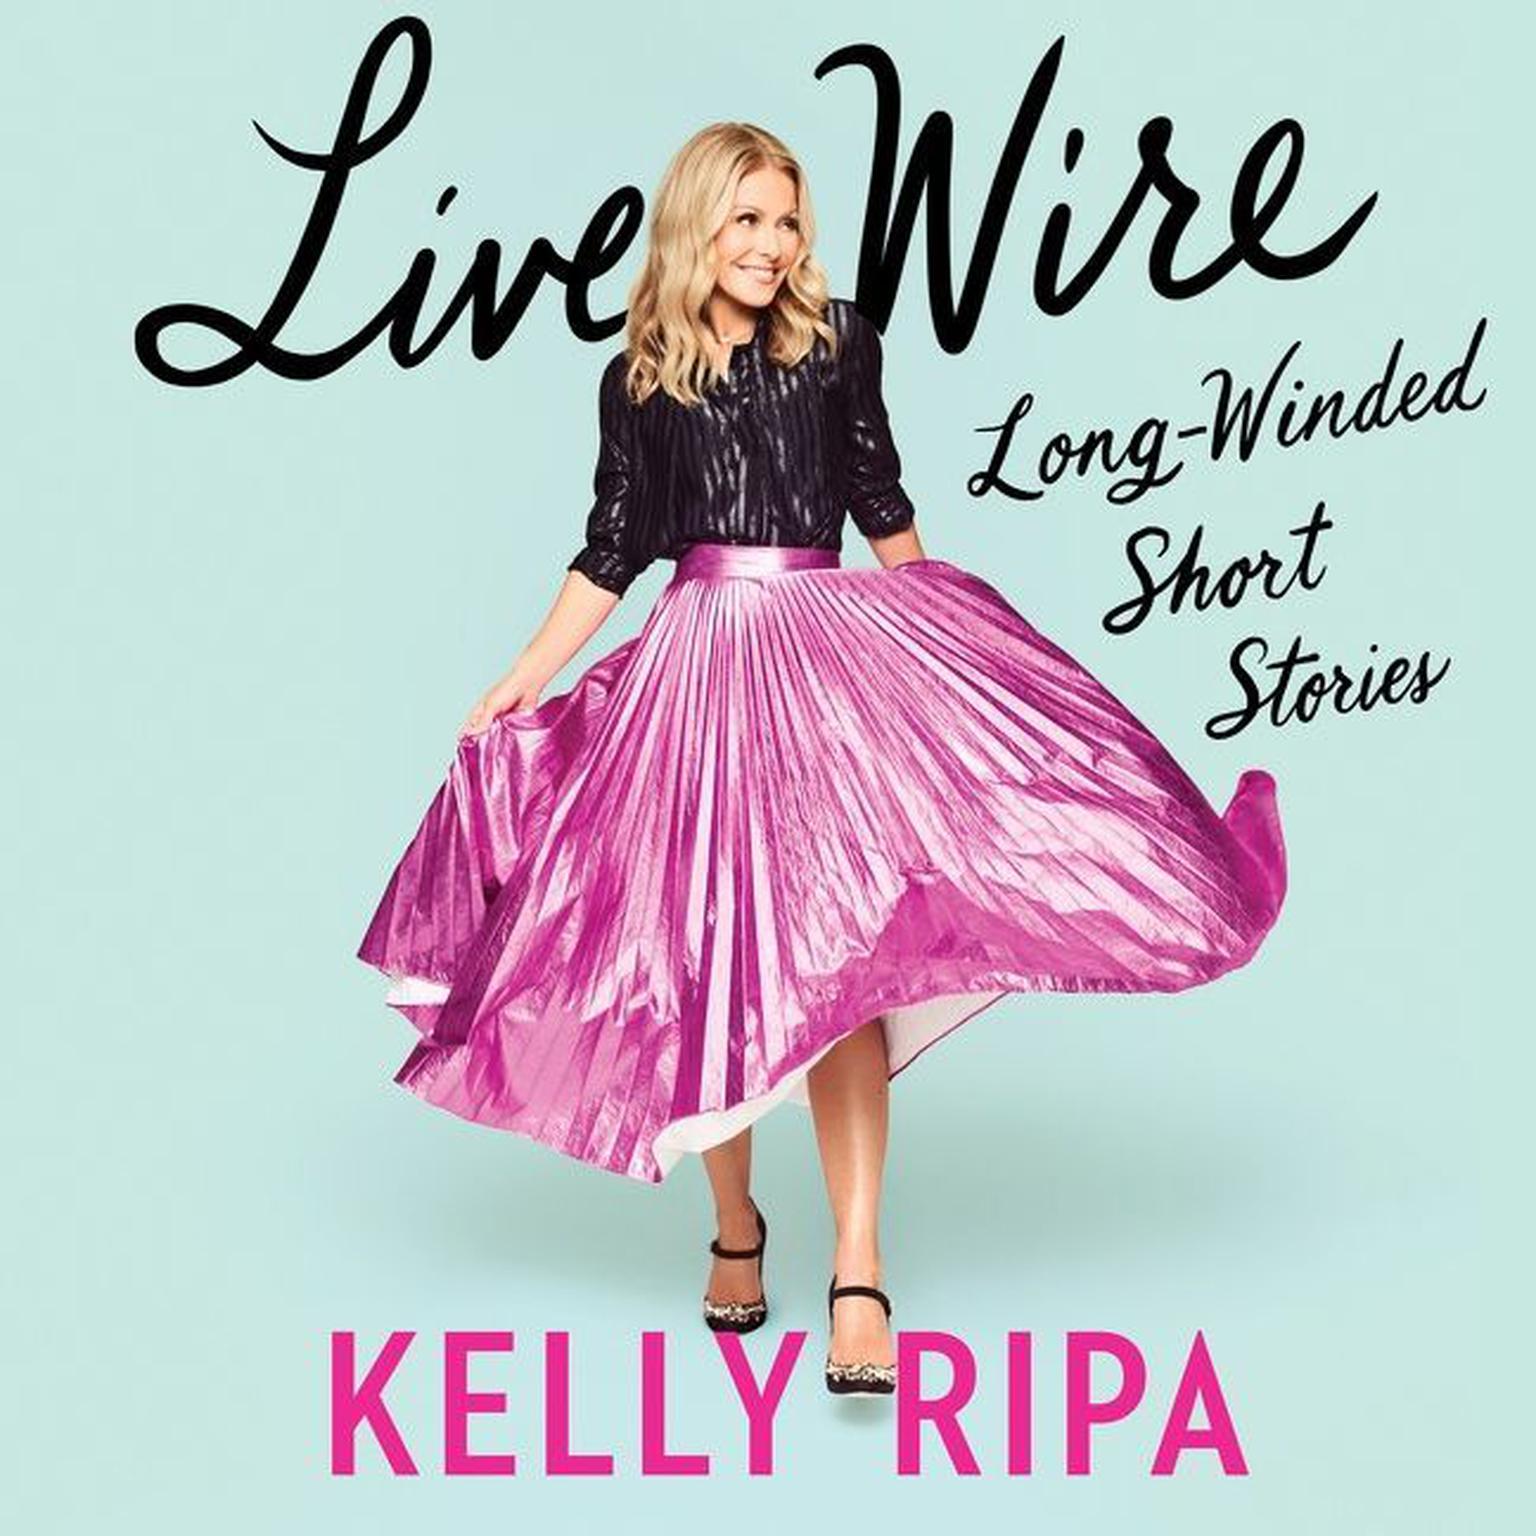 Live Wire Audiobook by Kelly Ripa — Download & Listen Now